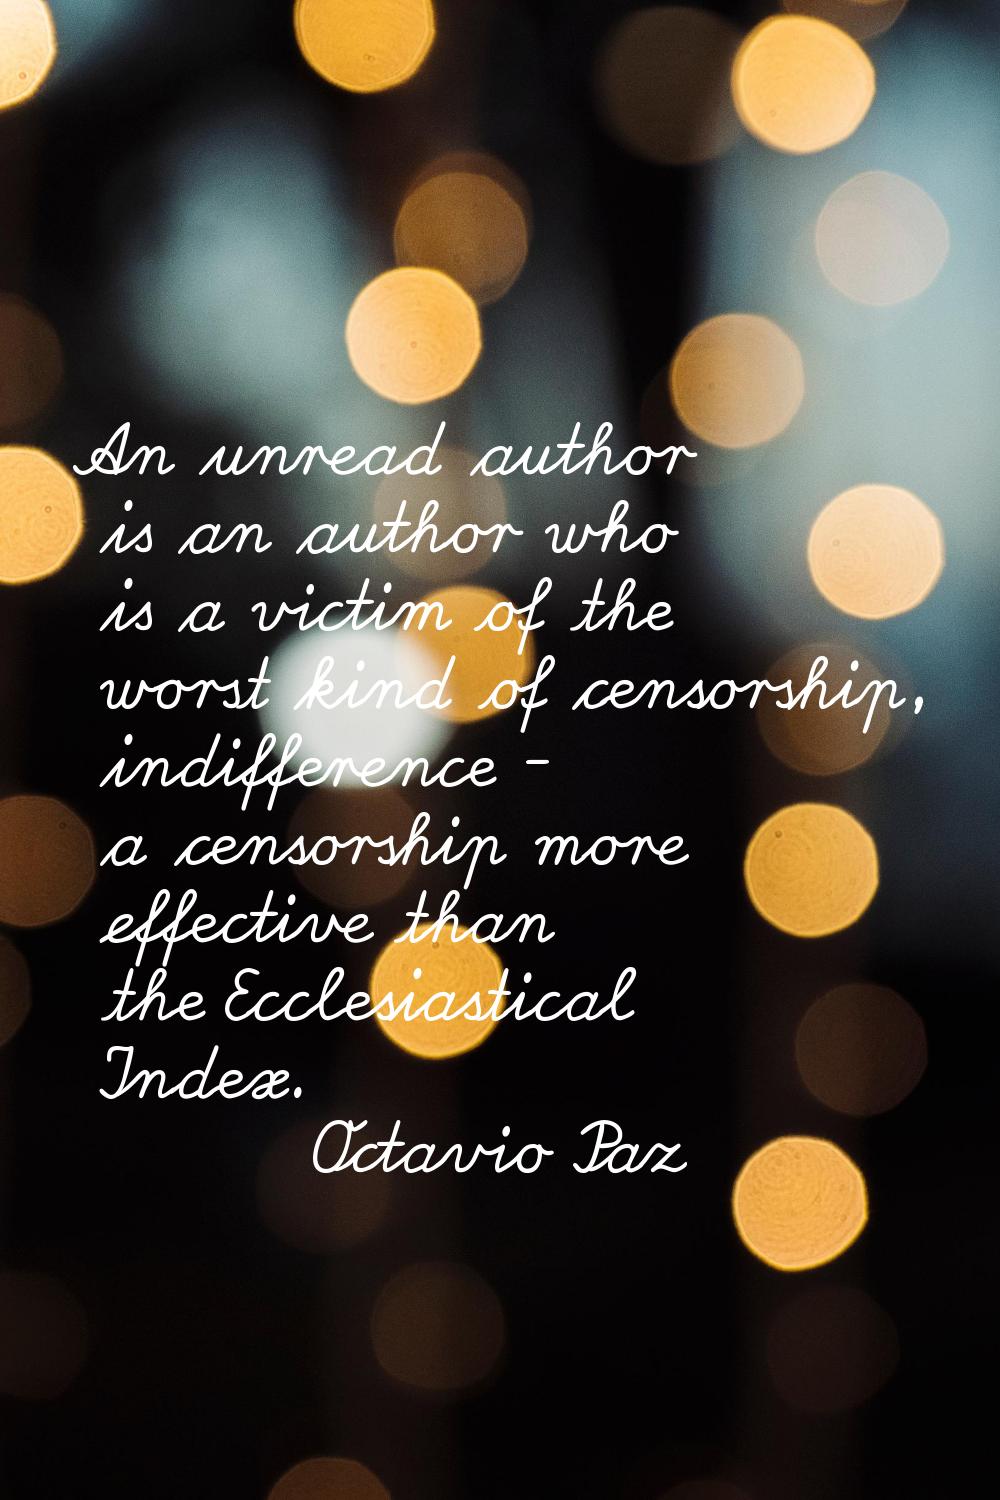 An unread author is an author who is a victim of the worst kind of censorship, indifference - a cen